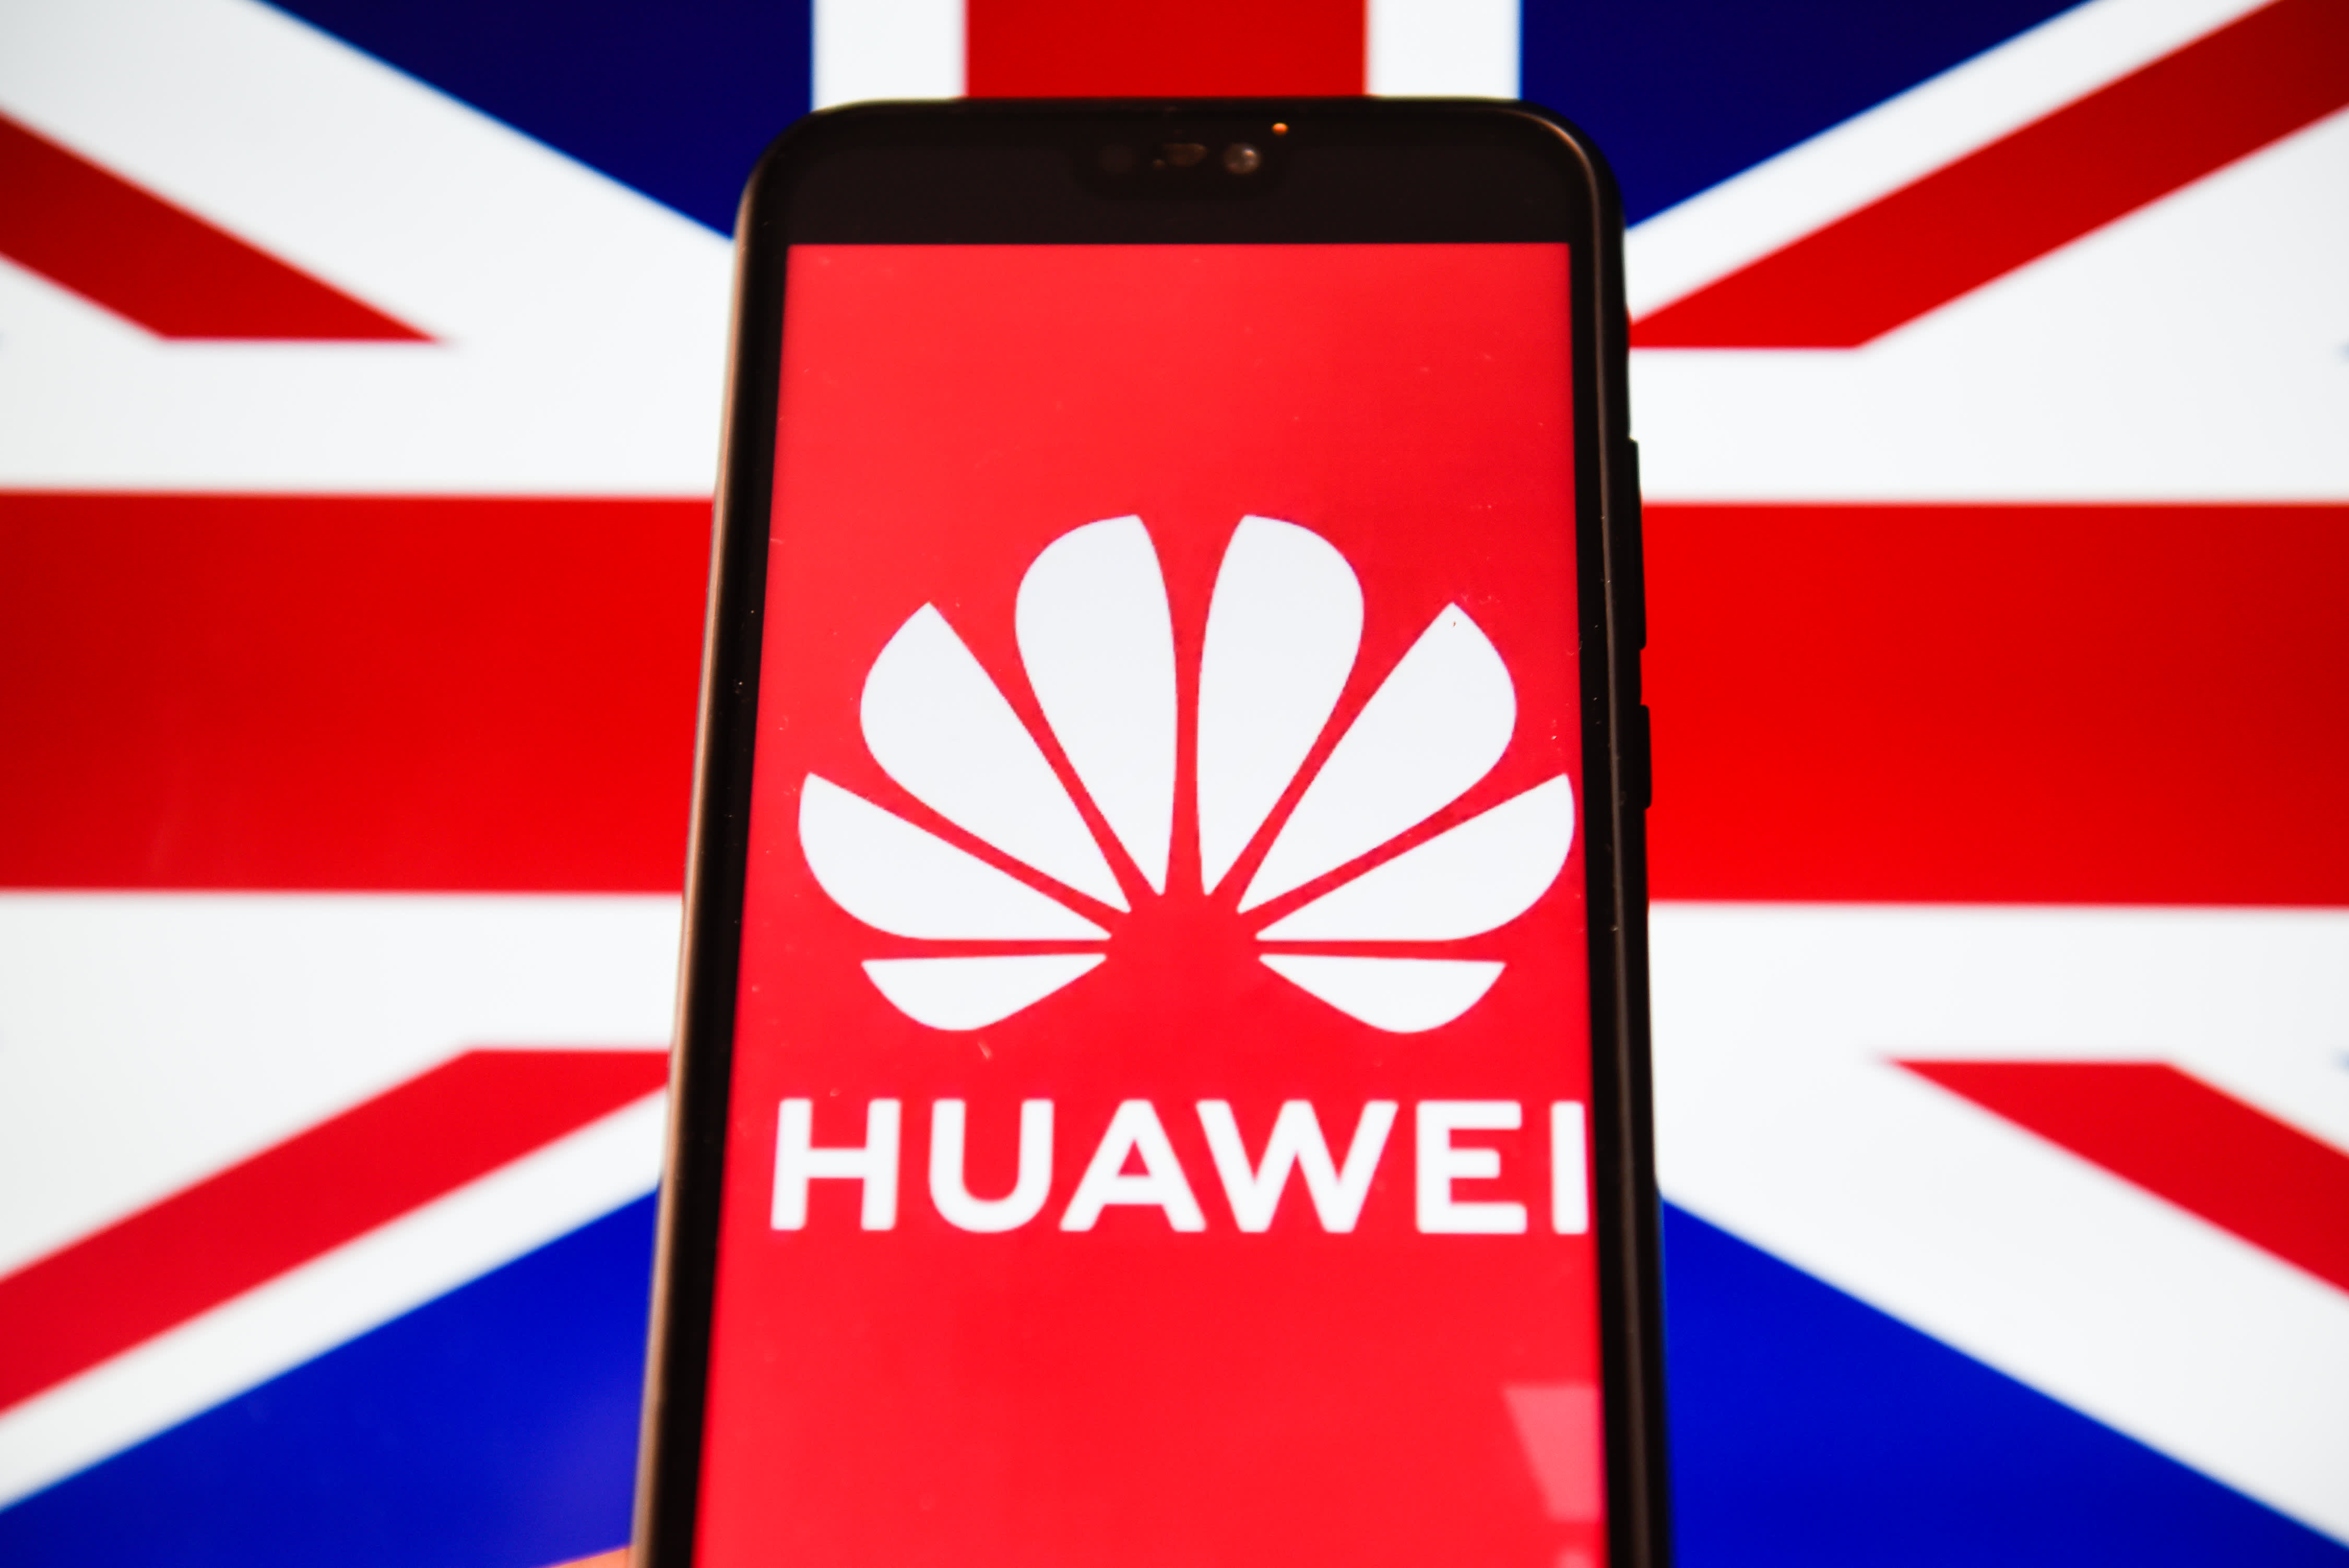 UK to phase out Huawei gear from 5G networks in a major policy U-turn after U.S. sanctions, reports say - CNBC